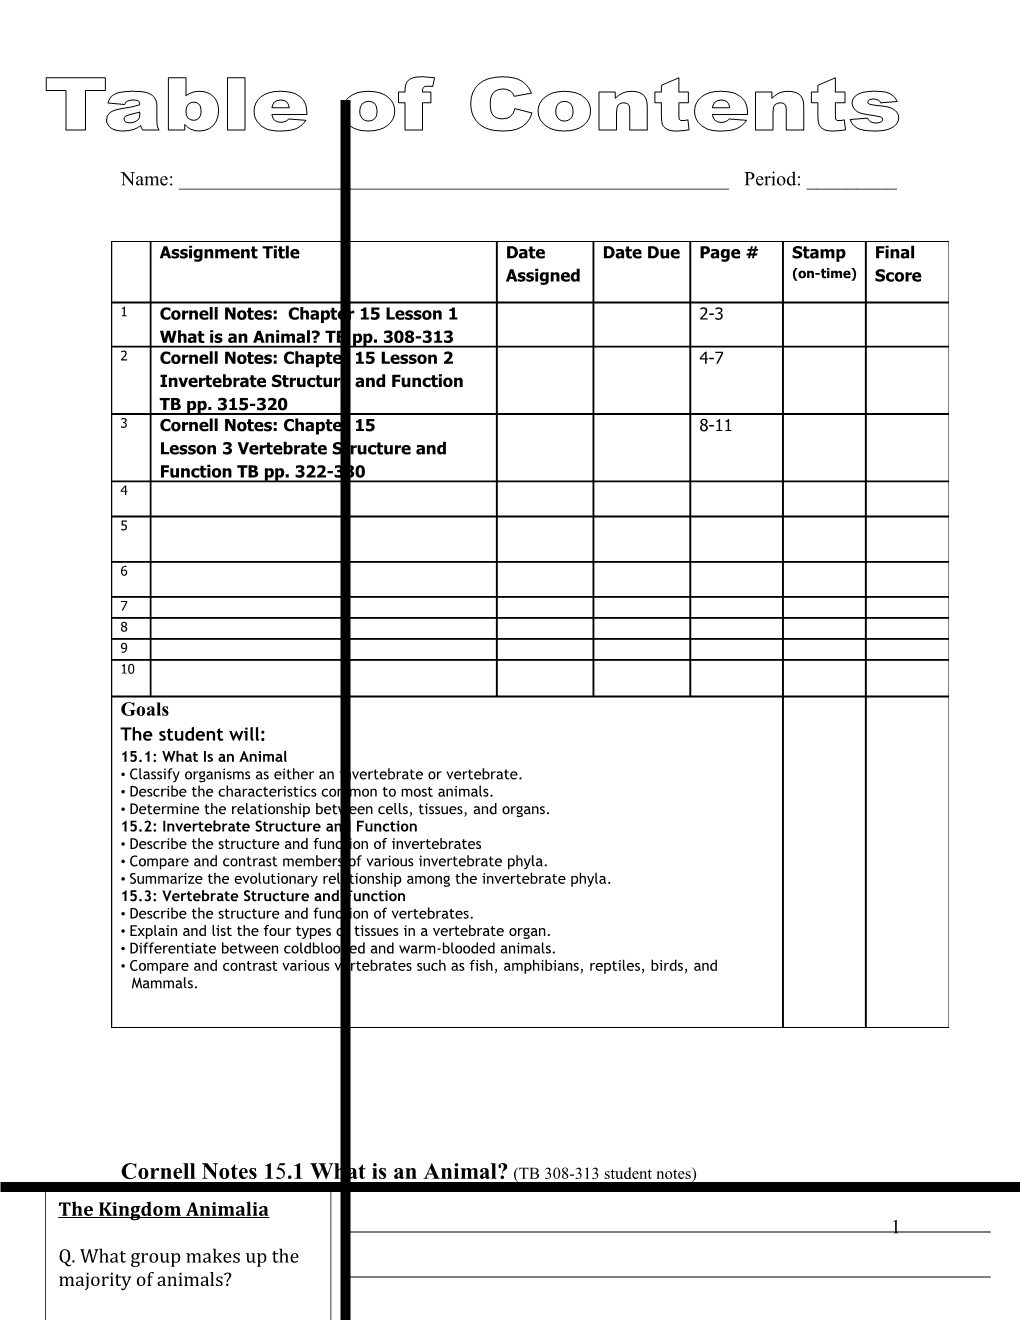 Cornell Notes 15.1 What Is an Animal? (TB 308-313 Student Notes)